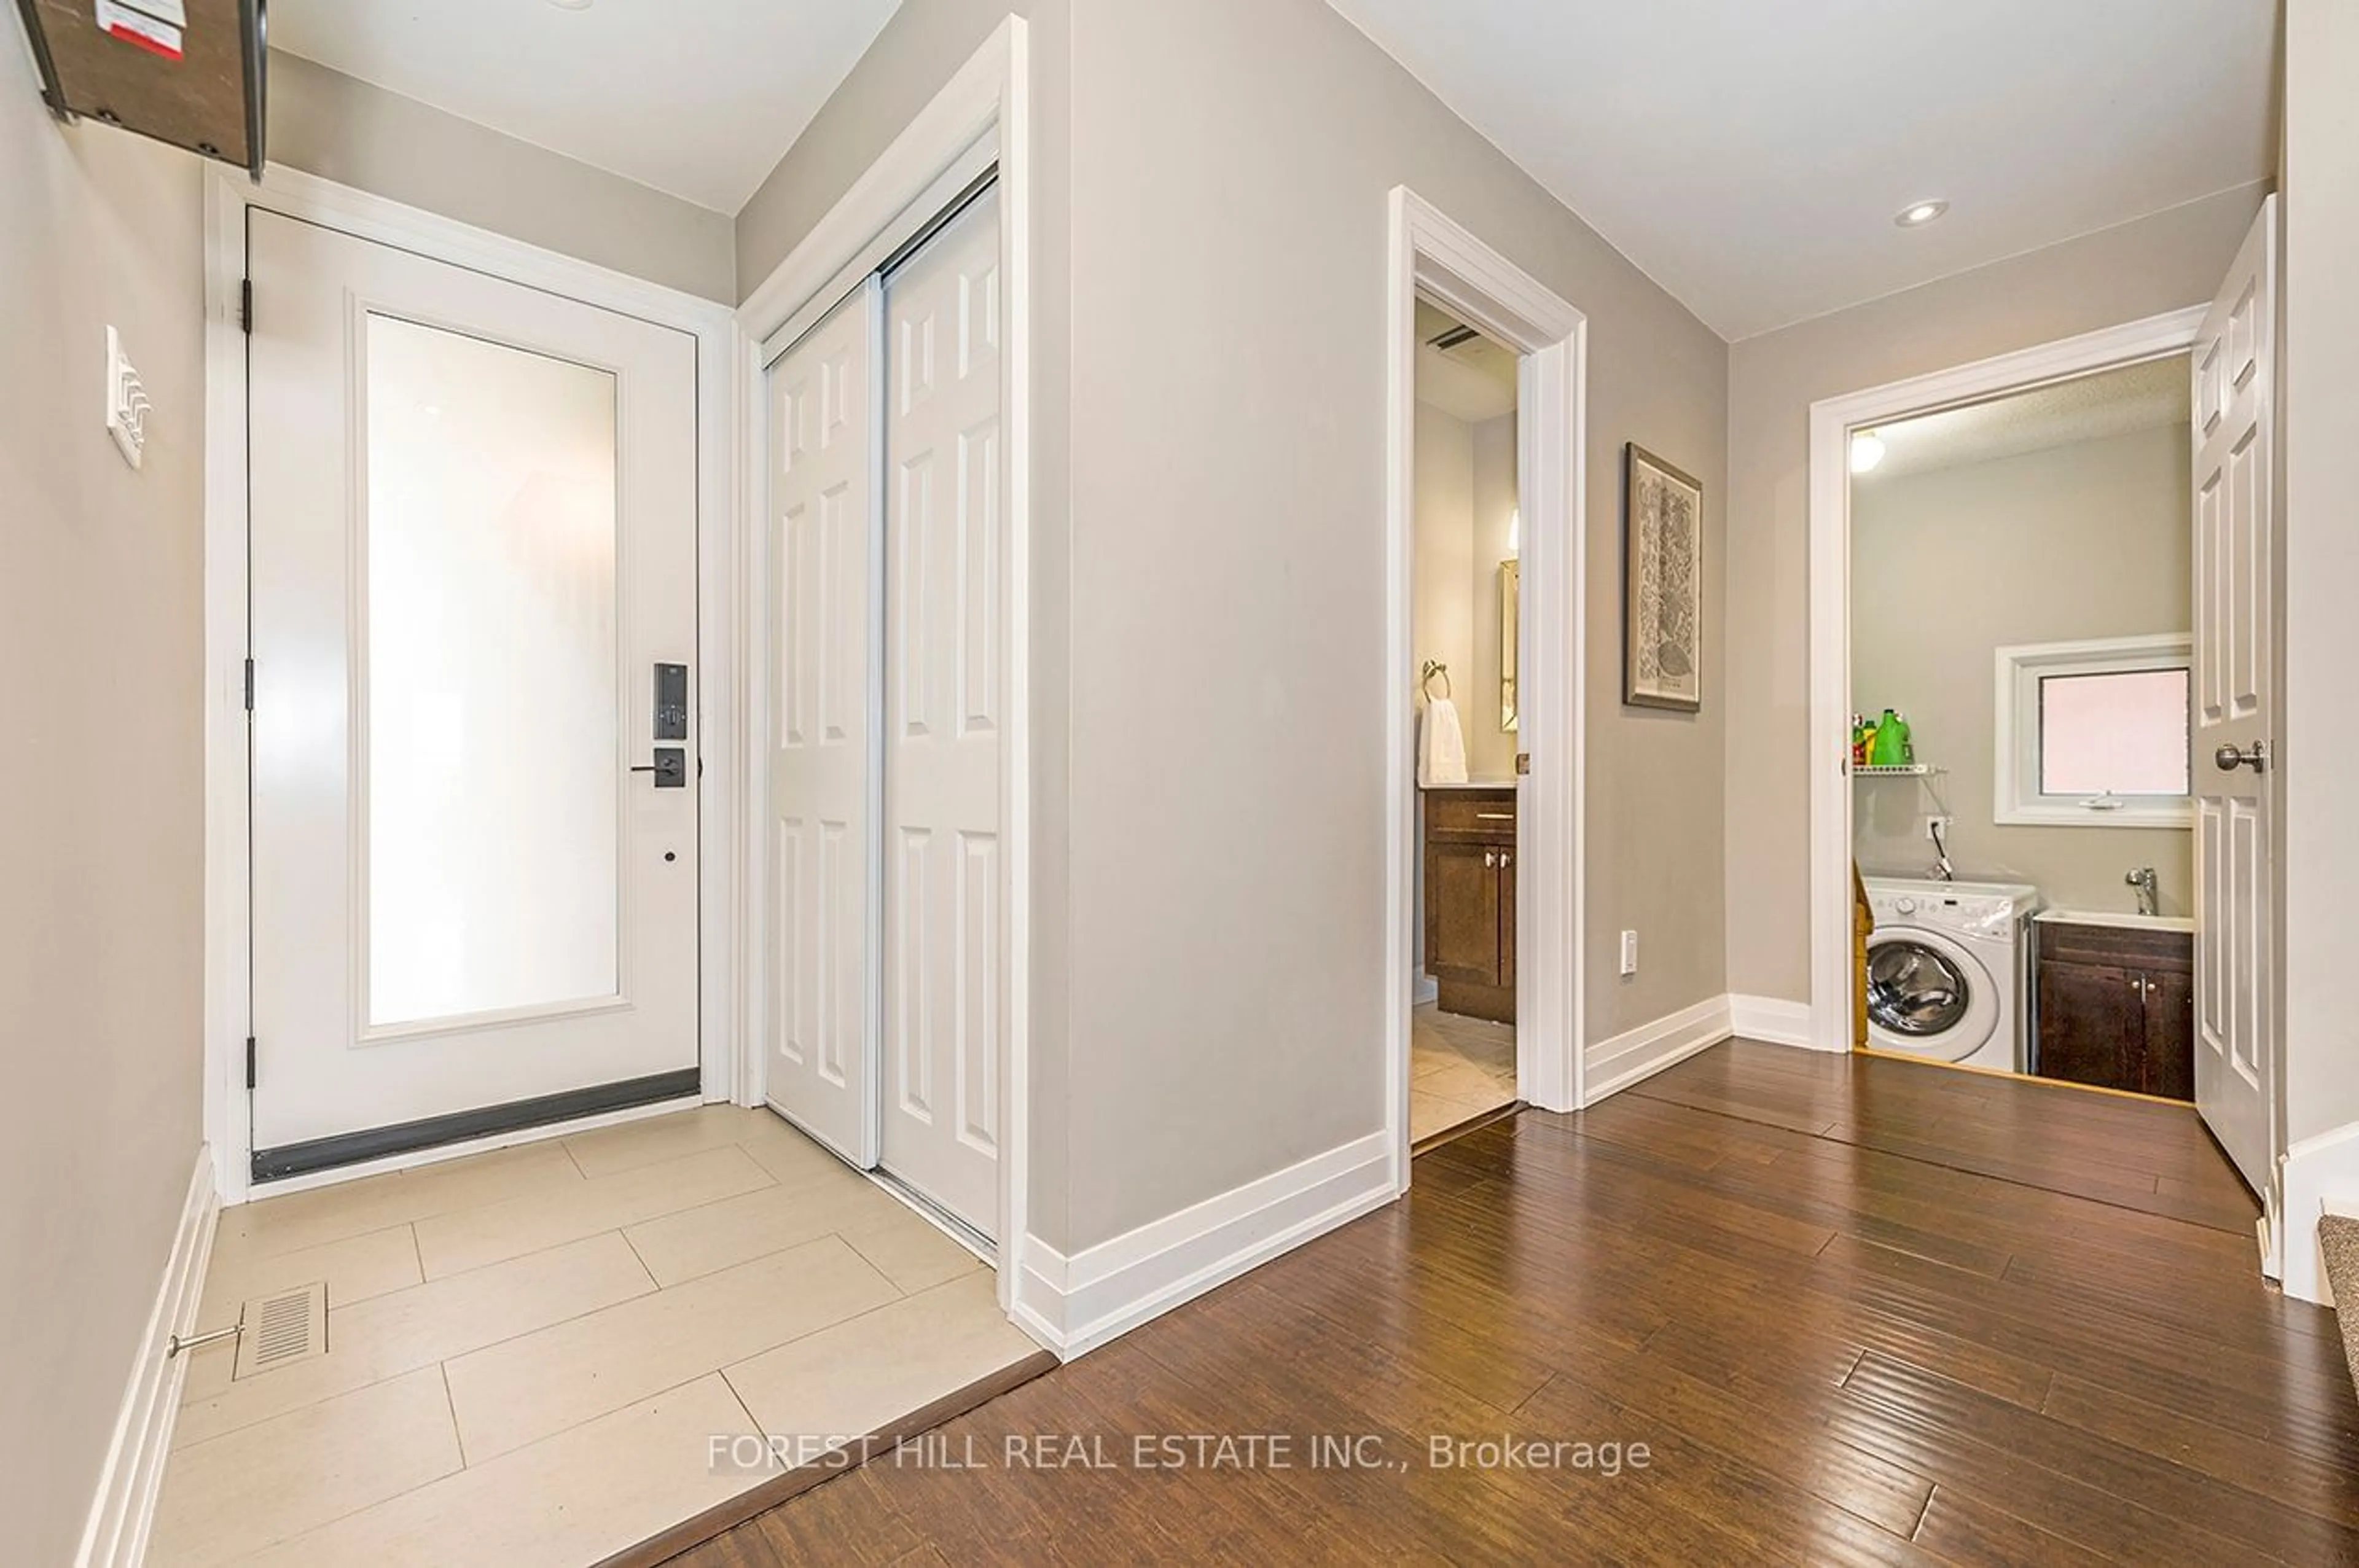 Indoor entryway for 1030 Hedge Dr, Mississauga Ontario L4Y 1G2